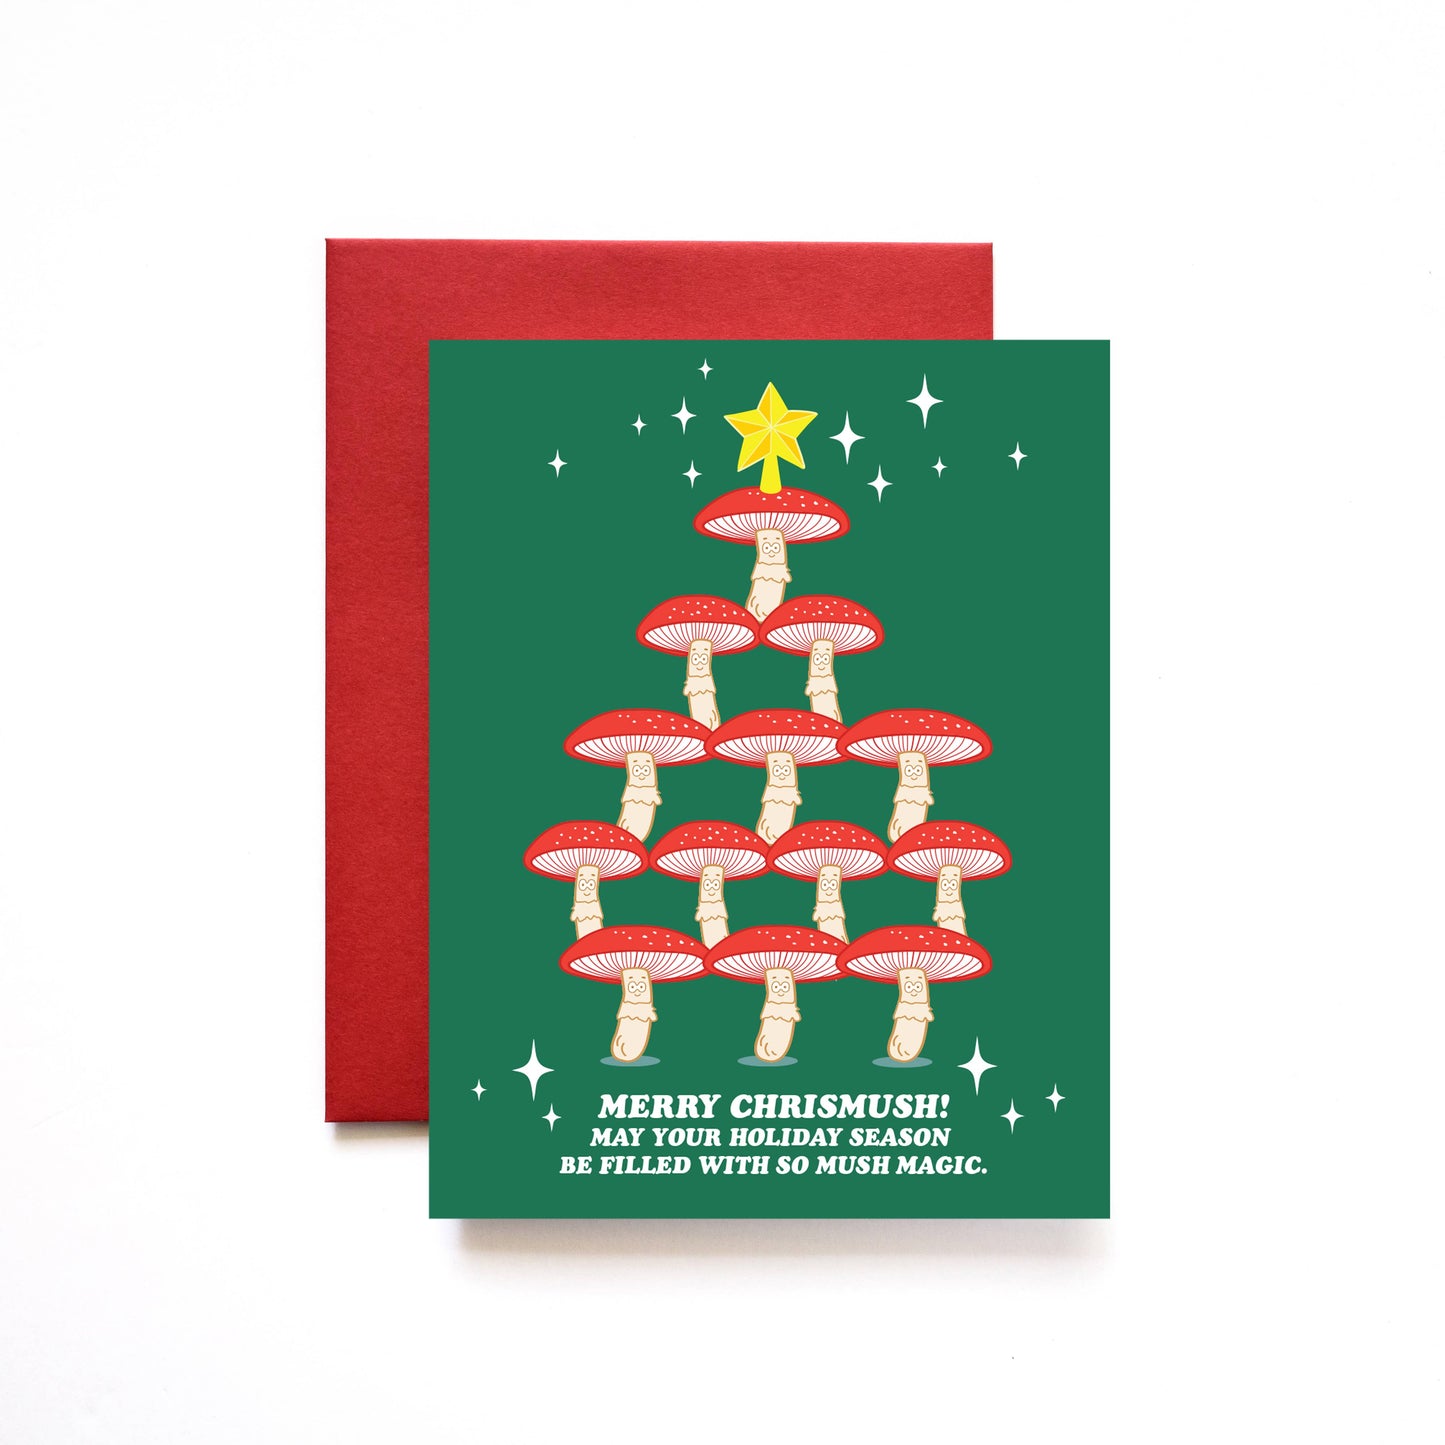 Holiday greeting card that reads "Merry Chrismush! May your holiday season be filled with so much magic" underneath a tree made out of mushrooms with a star at the very top. 